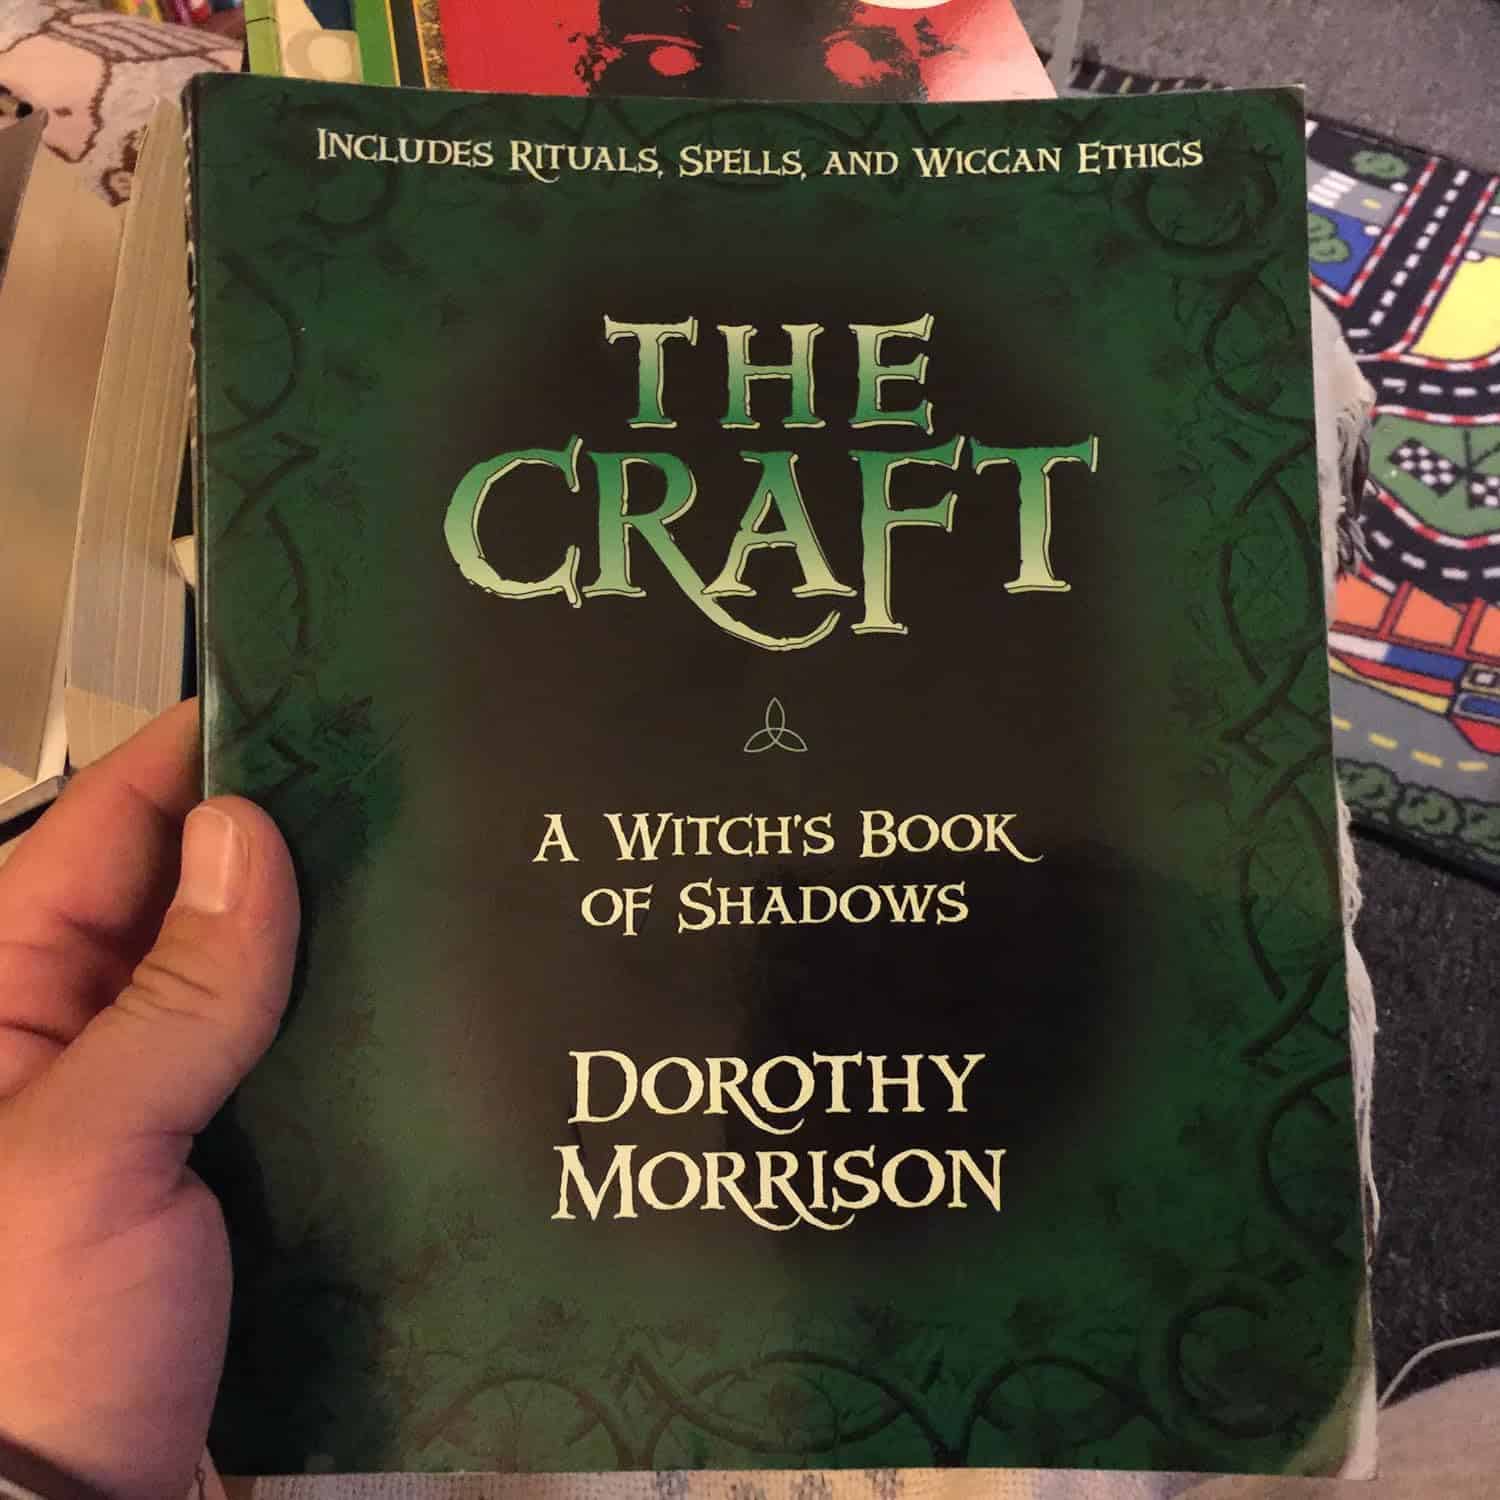 The Craft A Witch's Book of Shadows by Dorothy Morrison